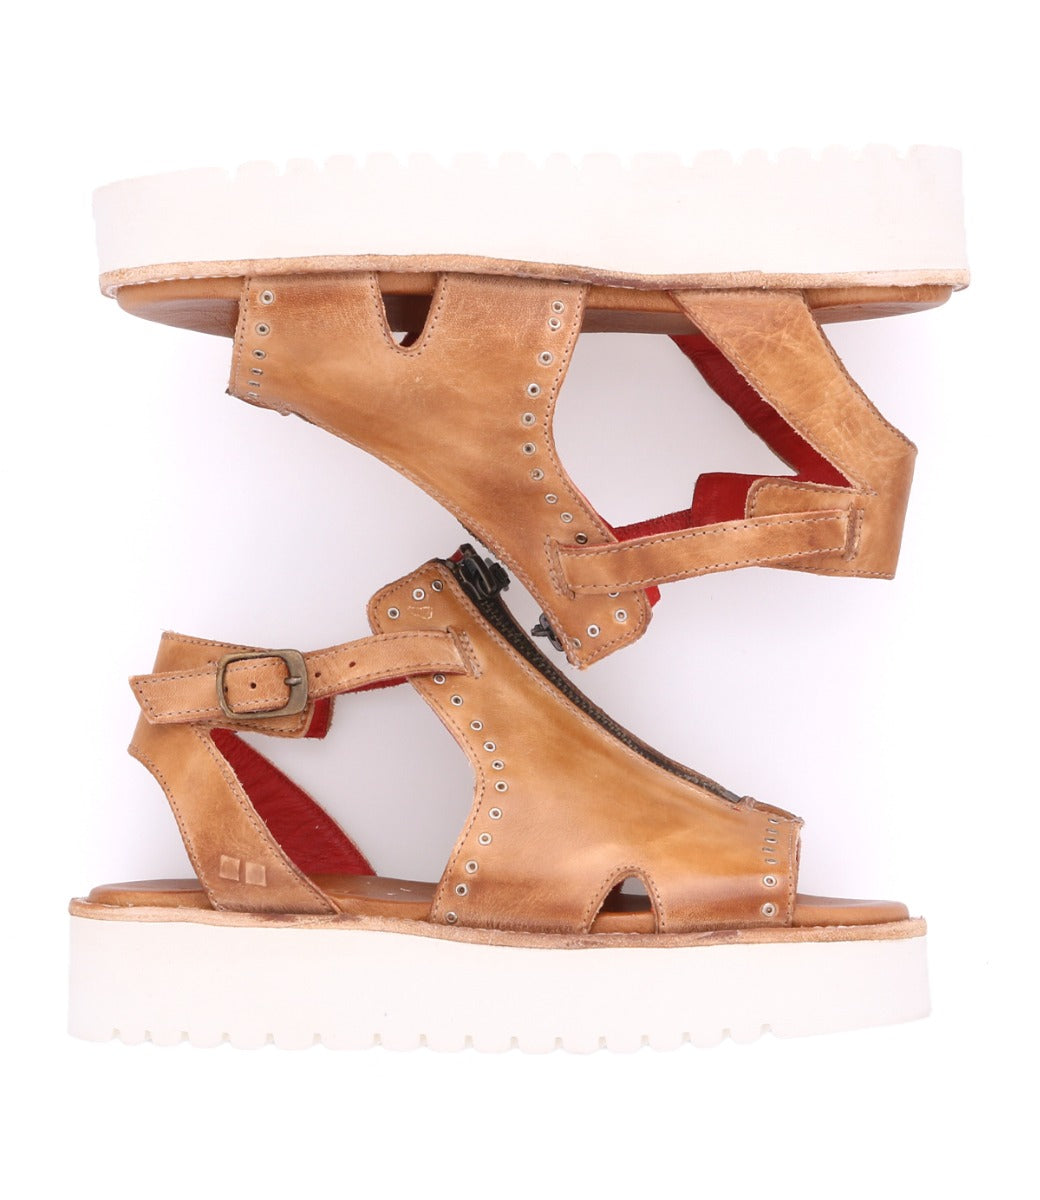 A pair of Clancy sandals by Bed Stu, made of tan leather with a white sole.